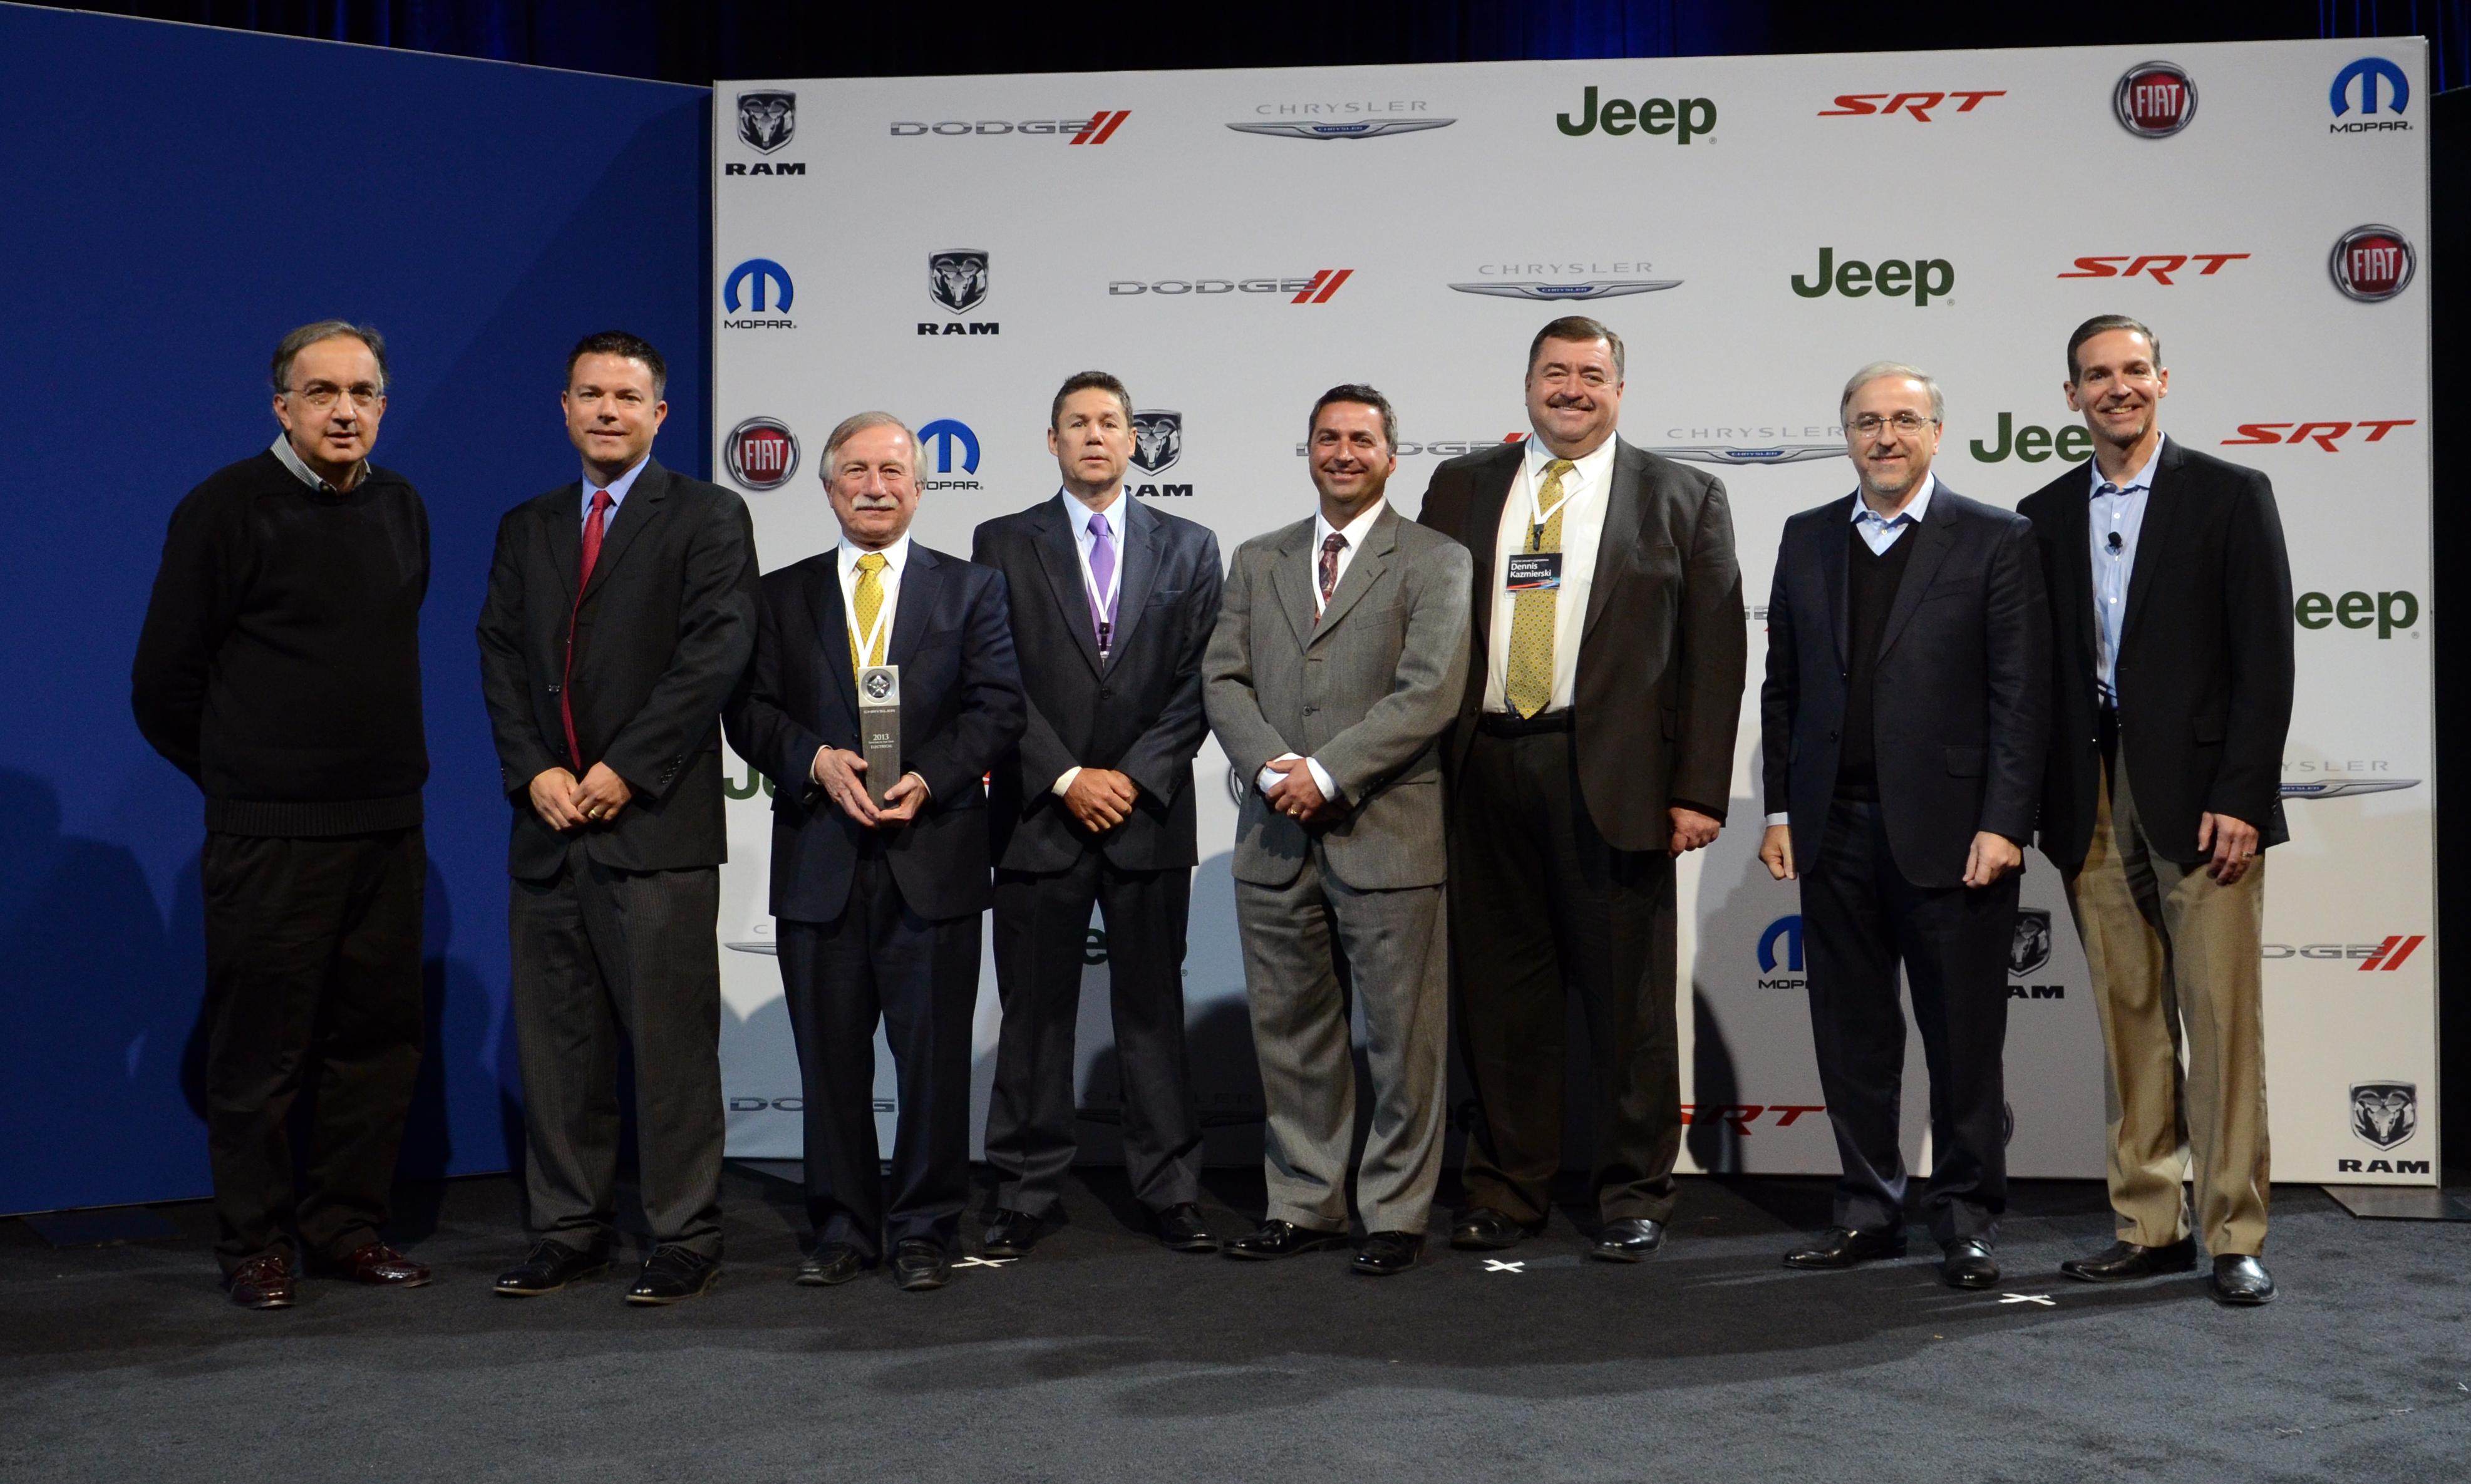 STRATTEC SECURITY CORPORATION Receives Supplier of the Year Award From Chrysler